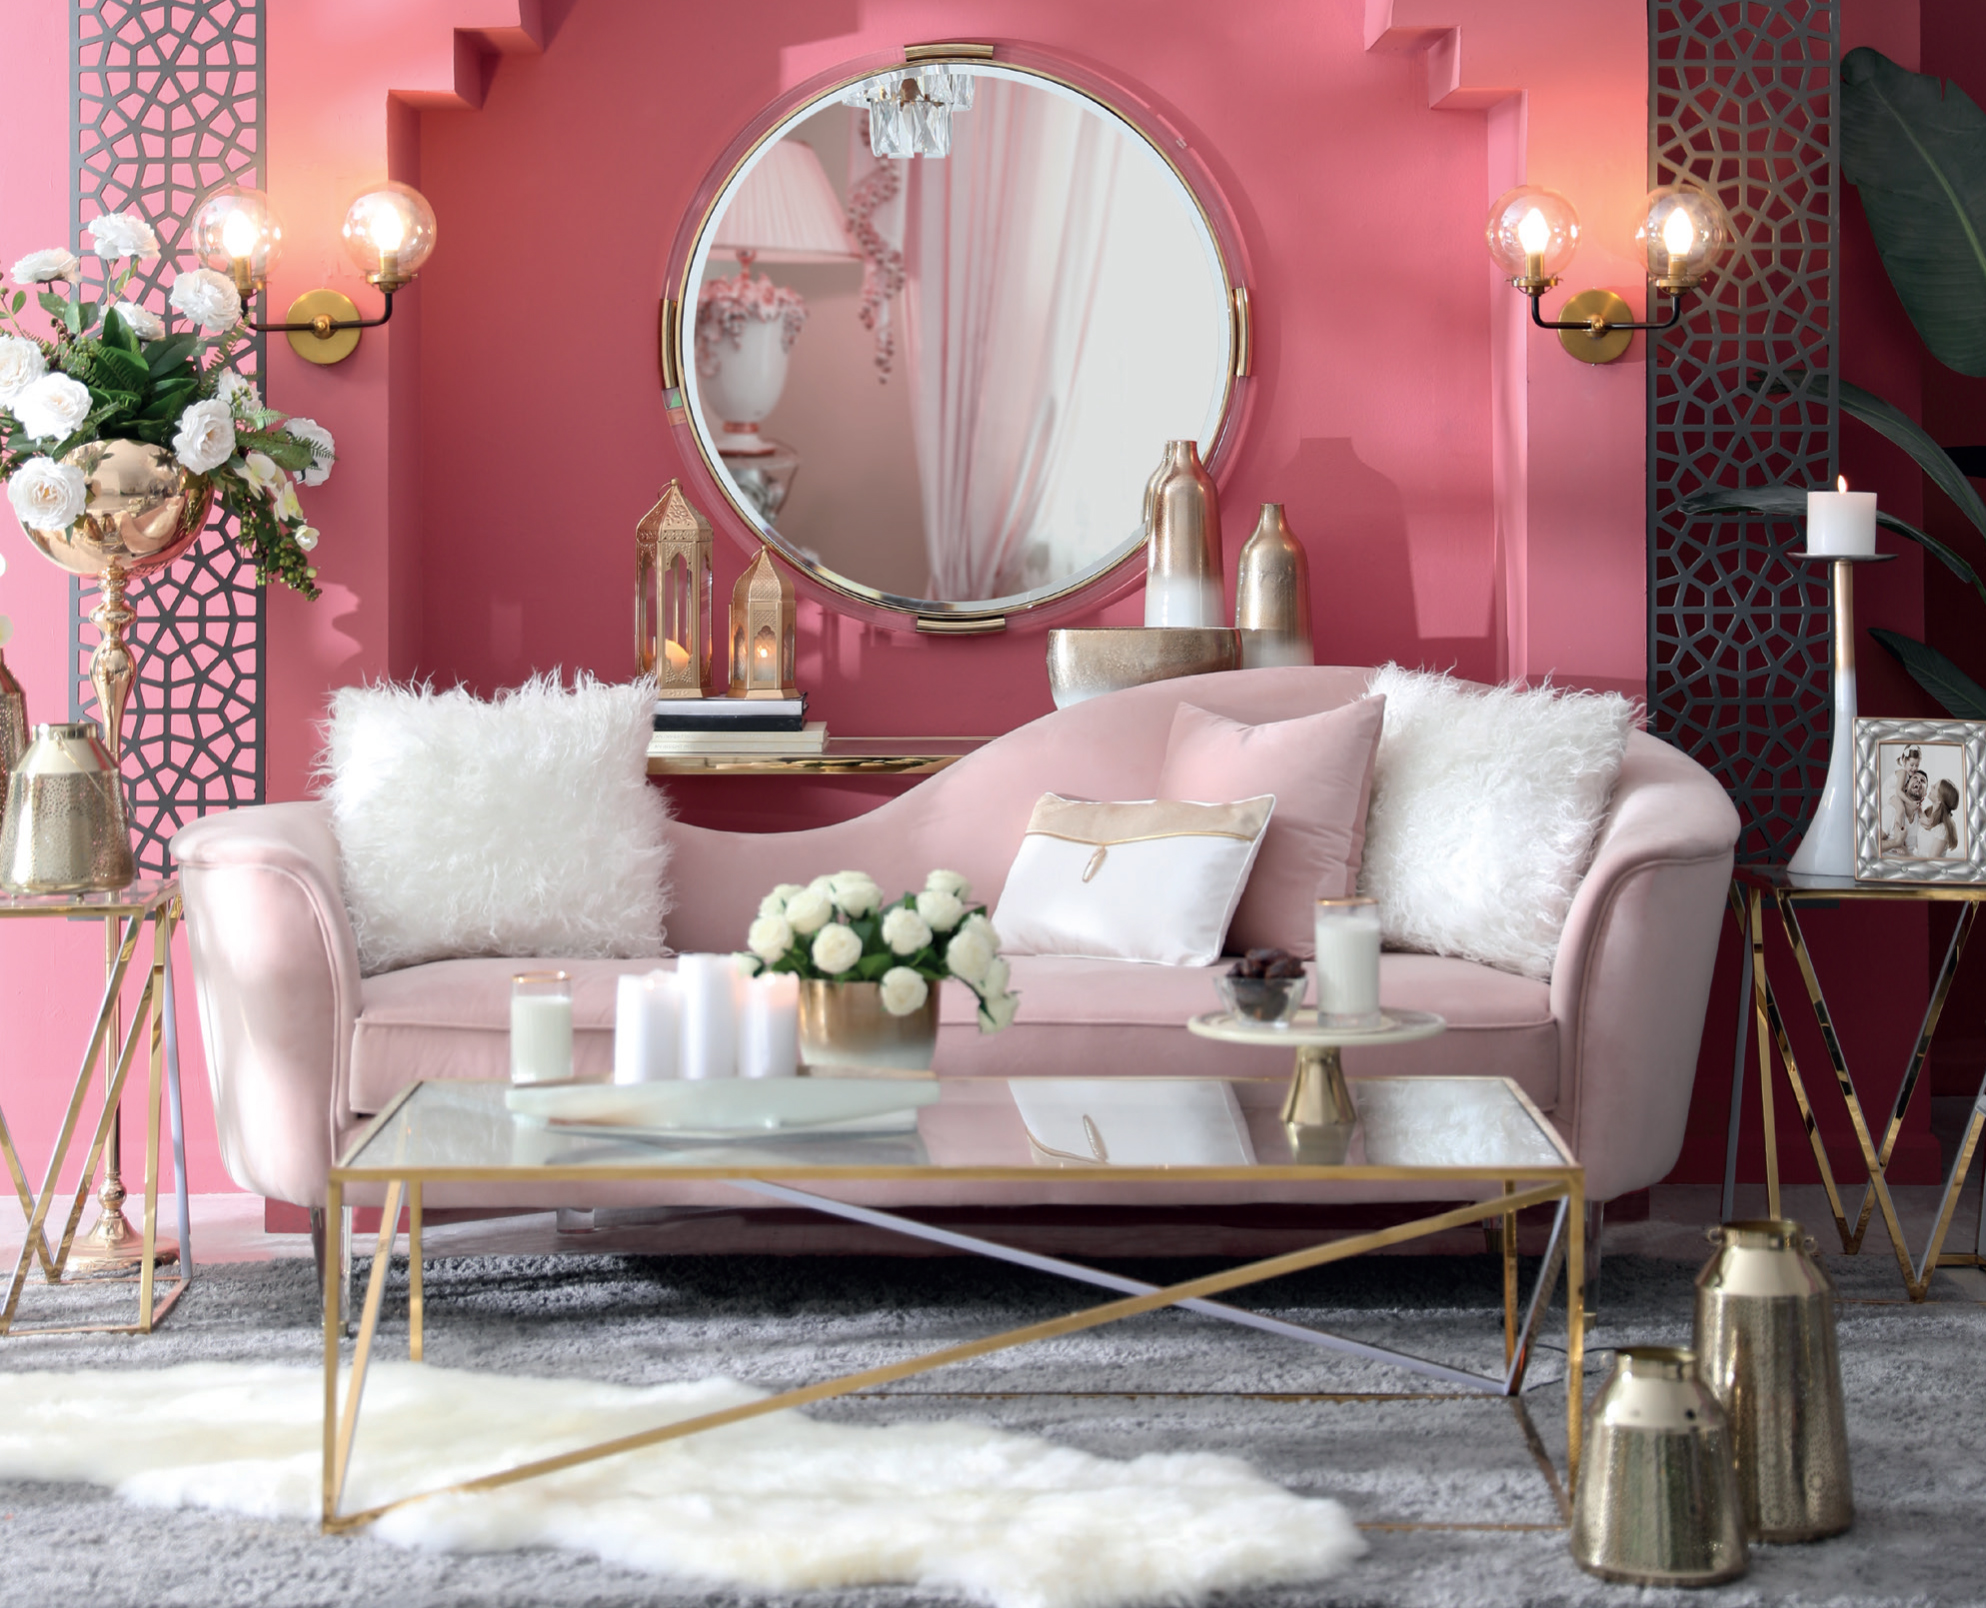 Pan Emirates unveils its 2021 Ramadan Collection exclusively for Interior Designers and Media